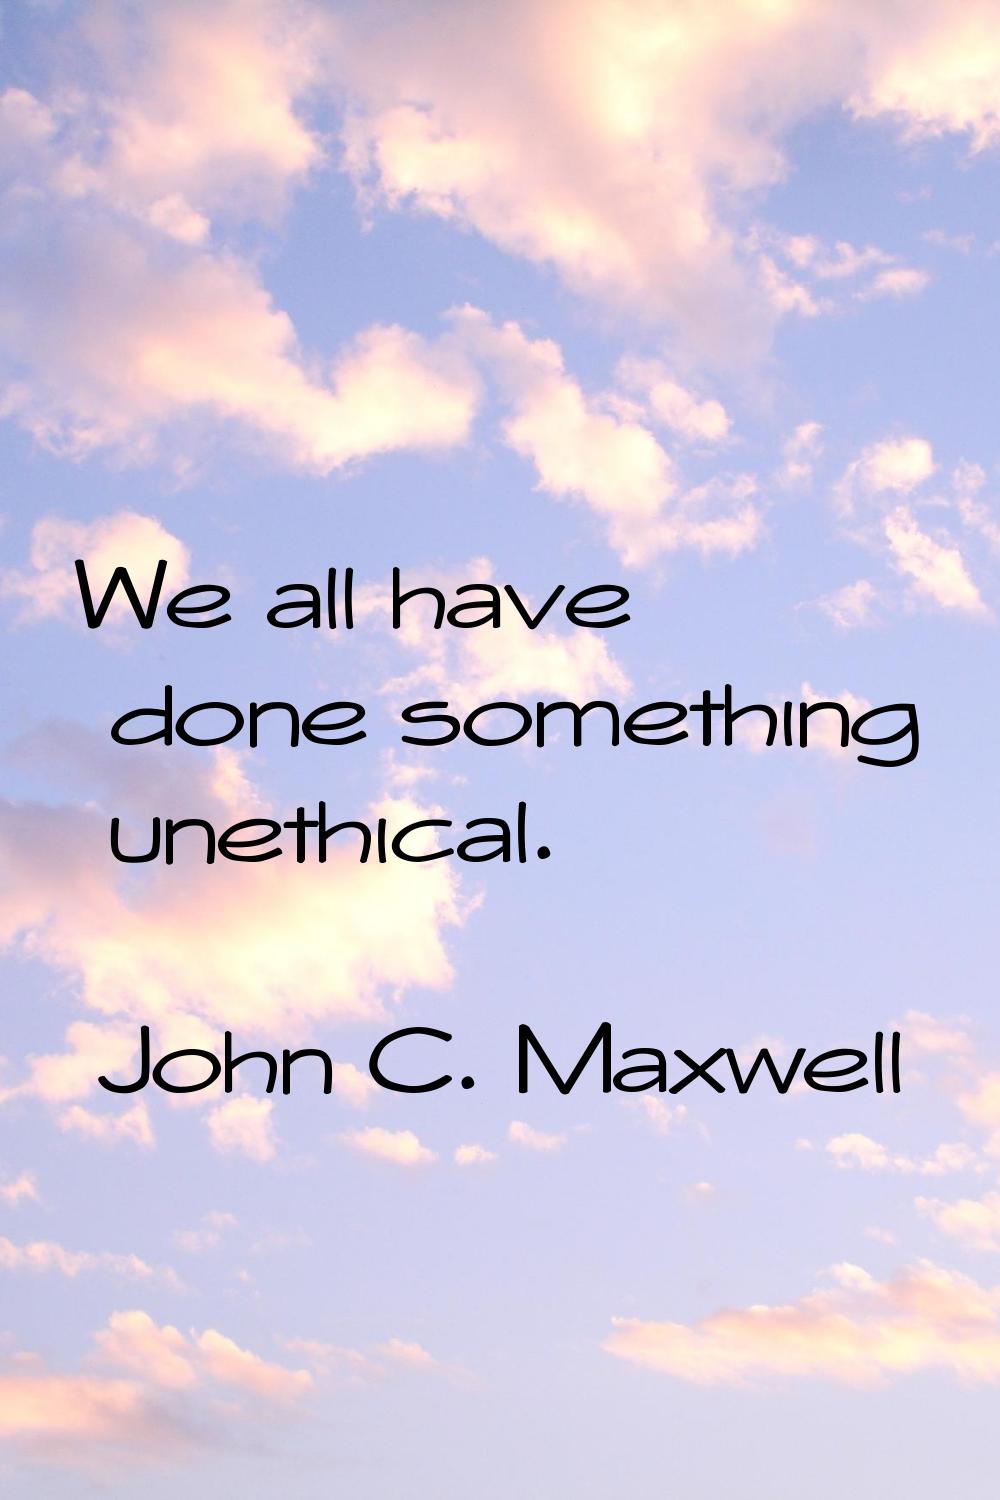 We all have done something unethical.